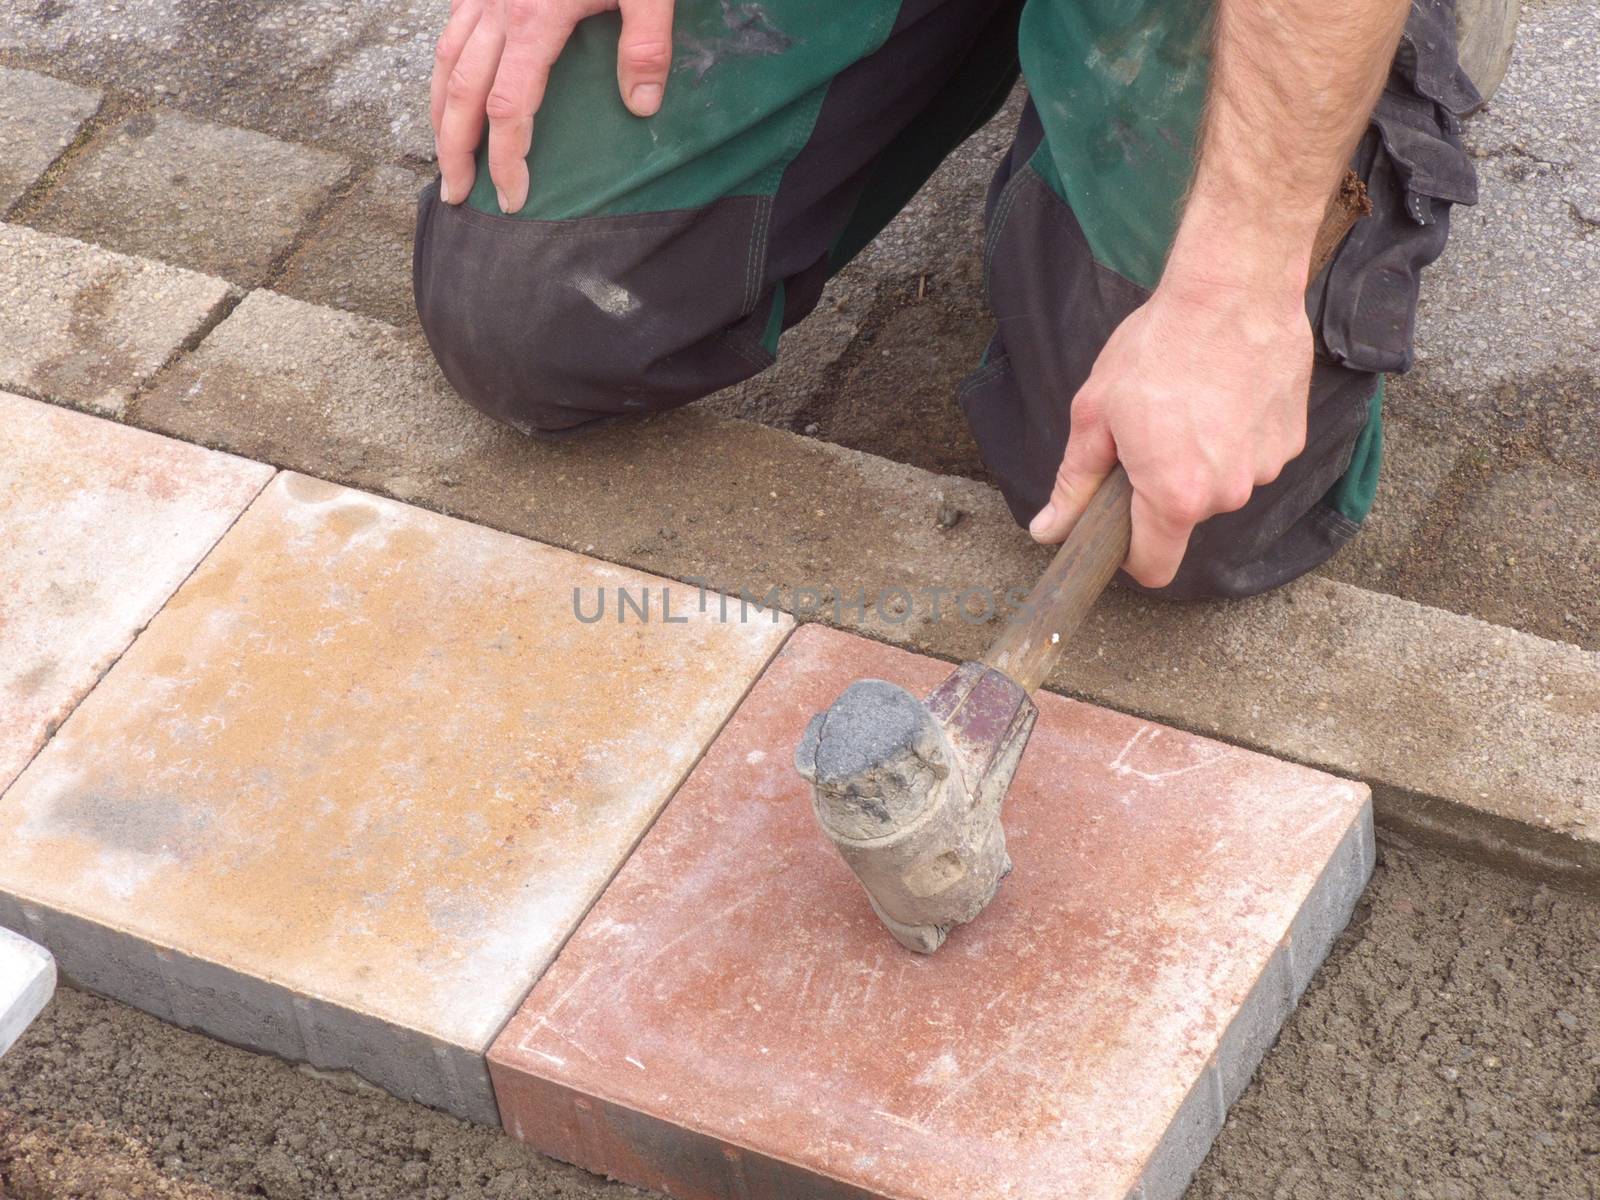 Lay paving stones by JFsPic